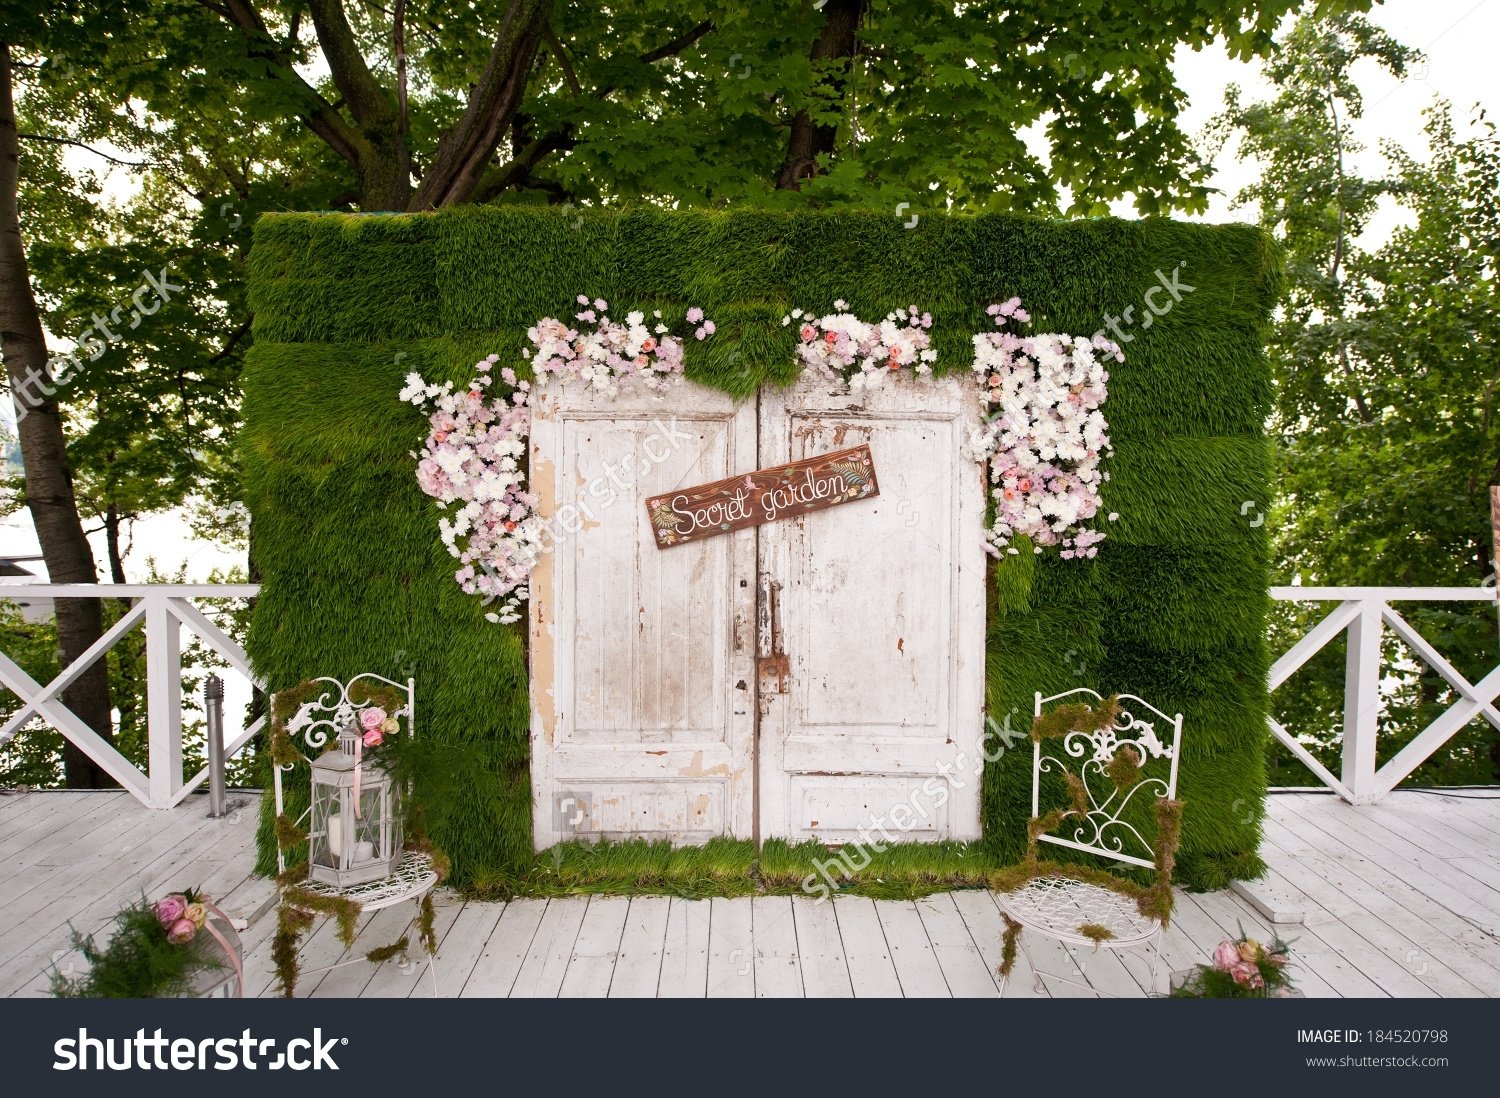 10 Most Popular Photo Booth Ideas For Weddings download wedding photo booth decoration wedding corners 1 2022